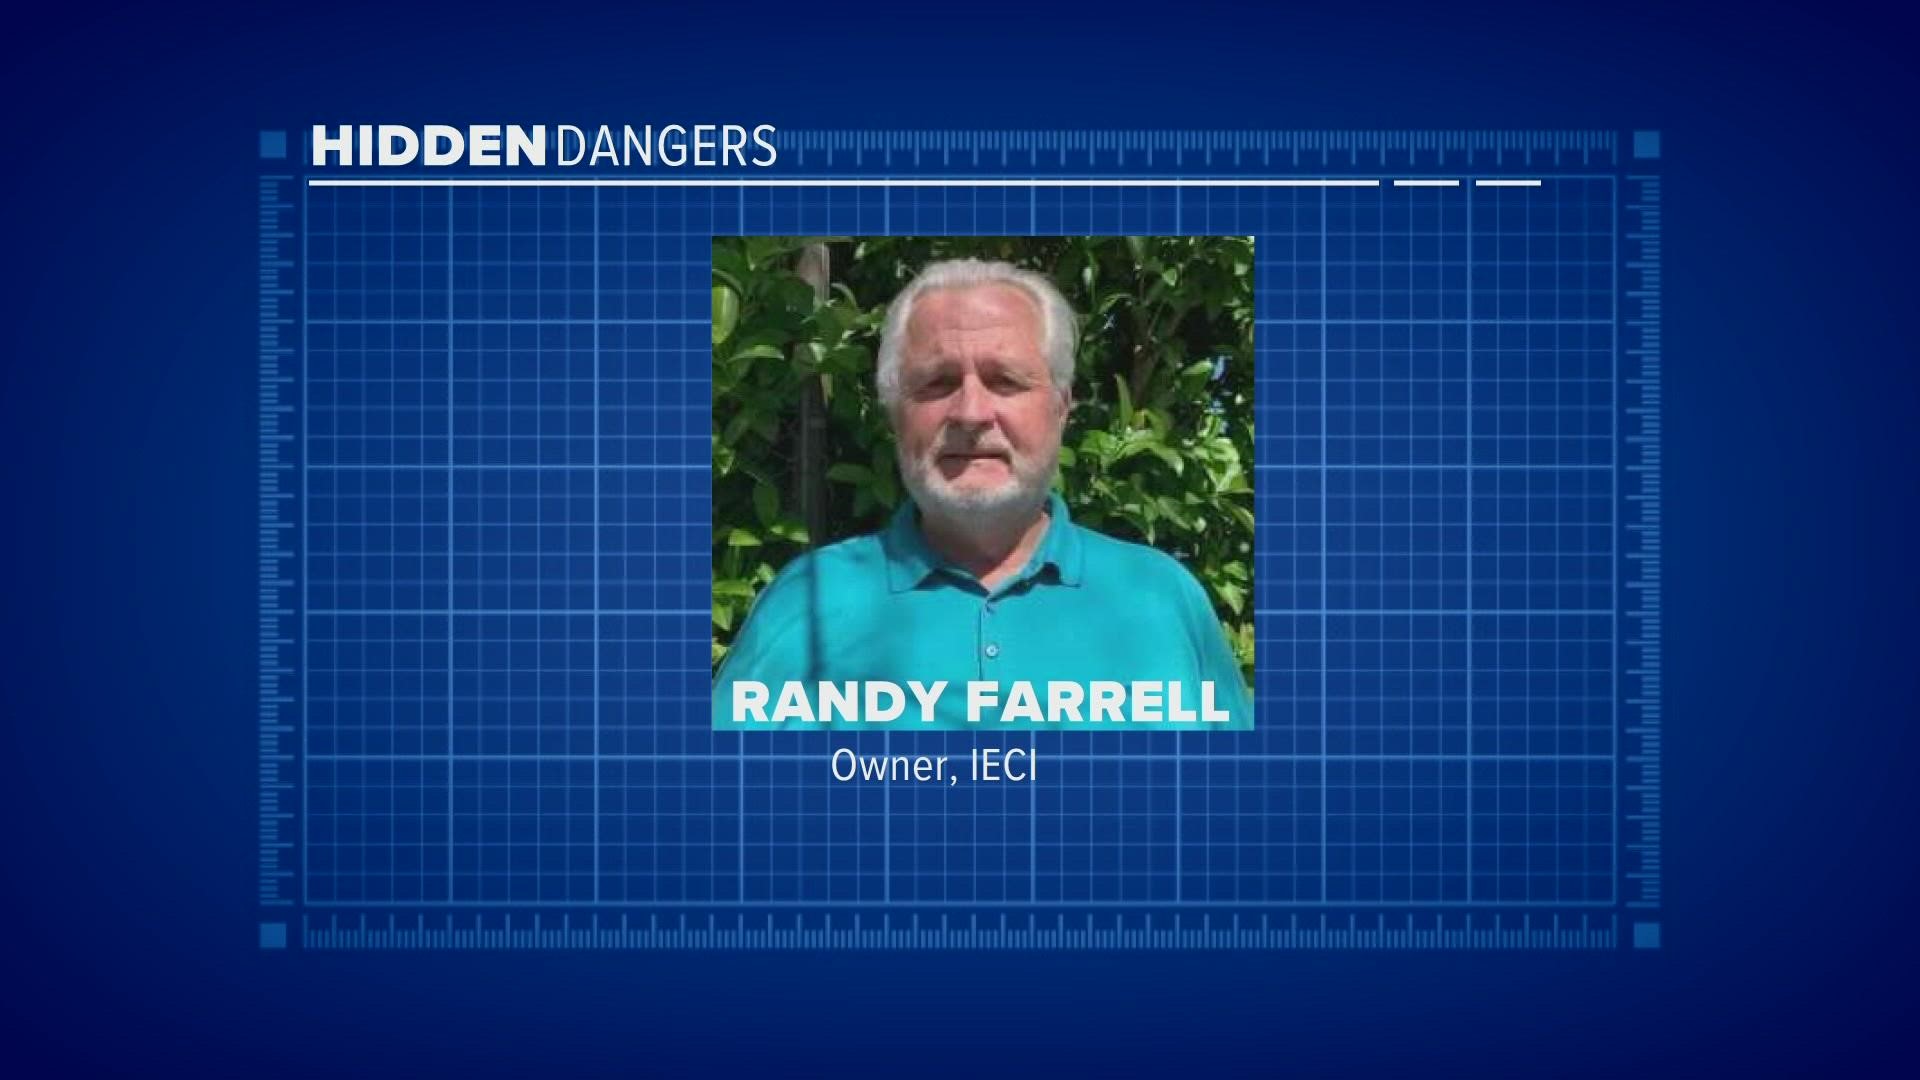 Randy Farrell has been charged in a tax fraud case with conspiracy to commit tax fraud